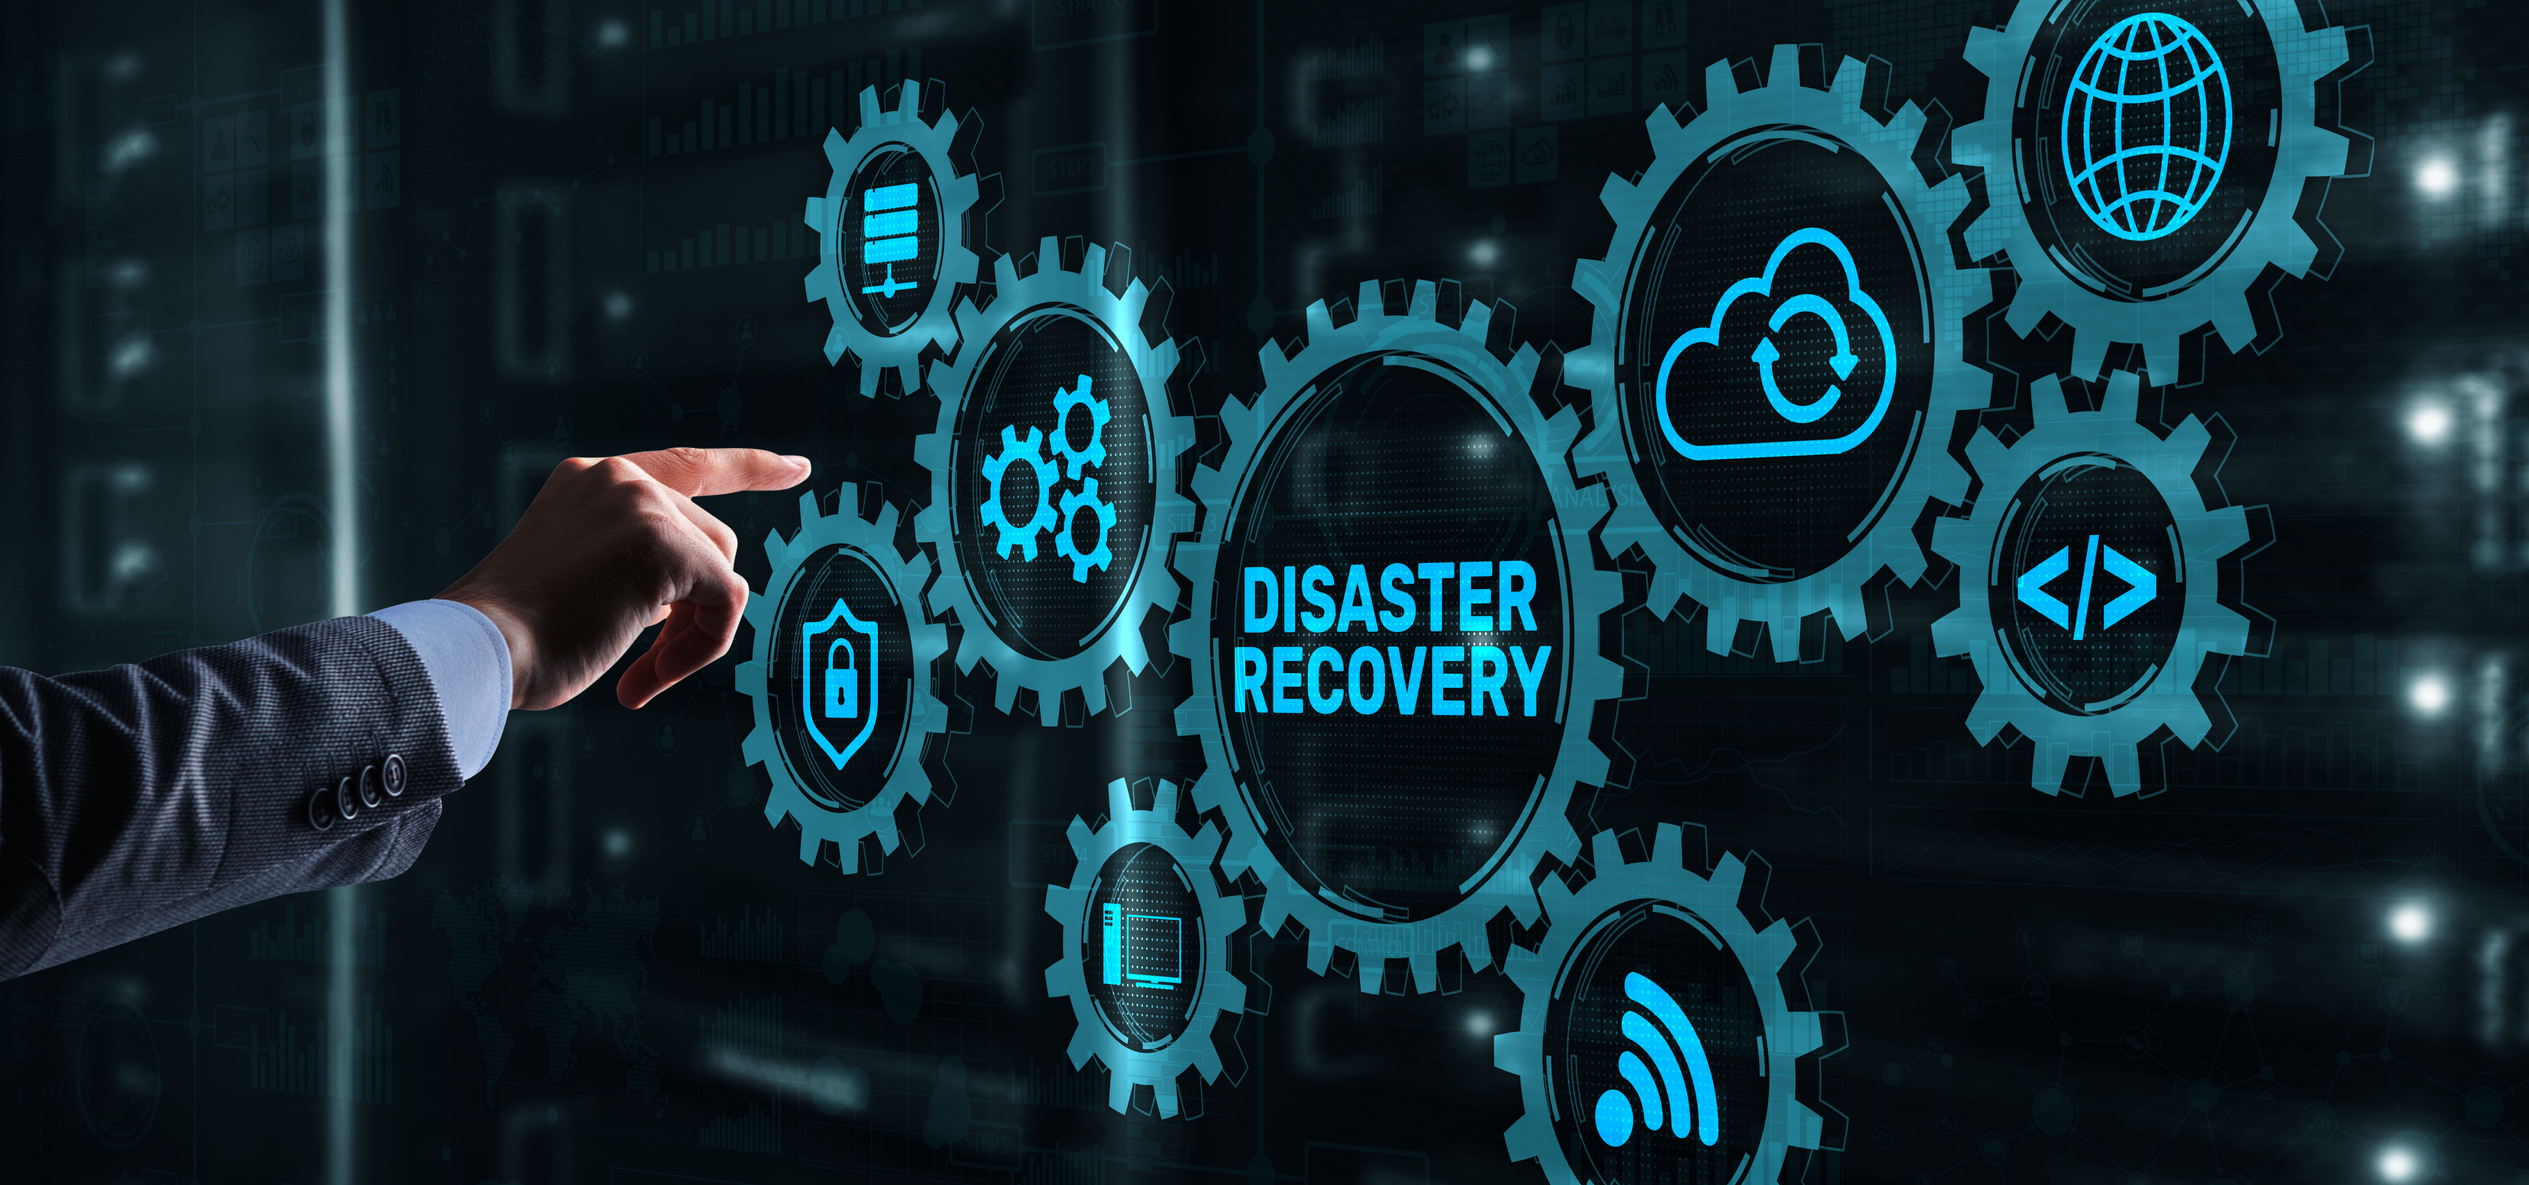 Disaster Recovery: Set, Change and Fine-tune RPO and RTO | ITPro Today: IT News, How-Tos, Trends, Case Studies, Career Tips, More